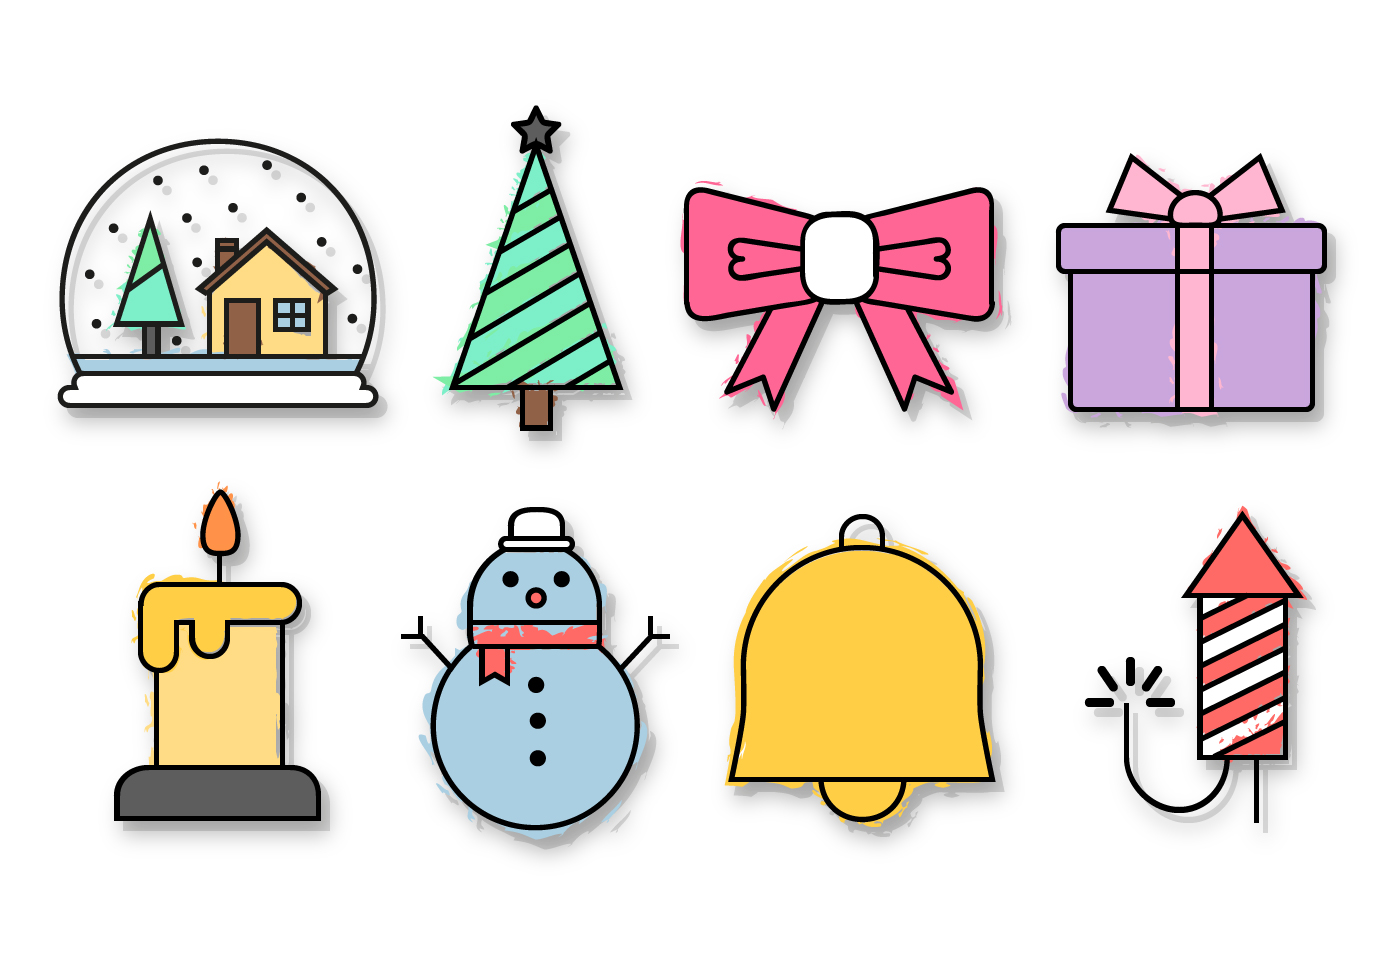 Download Free Christmas Icons Vector - Download Free Vectors ...